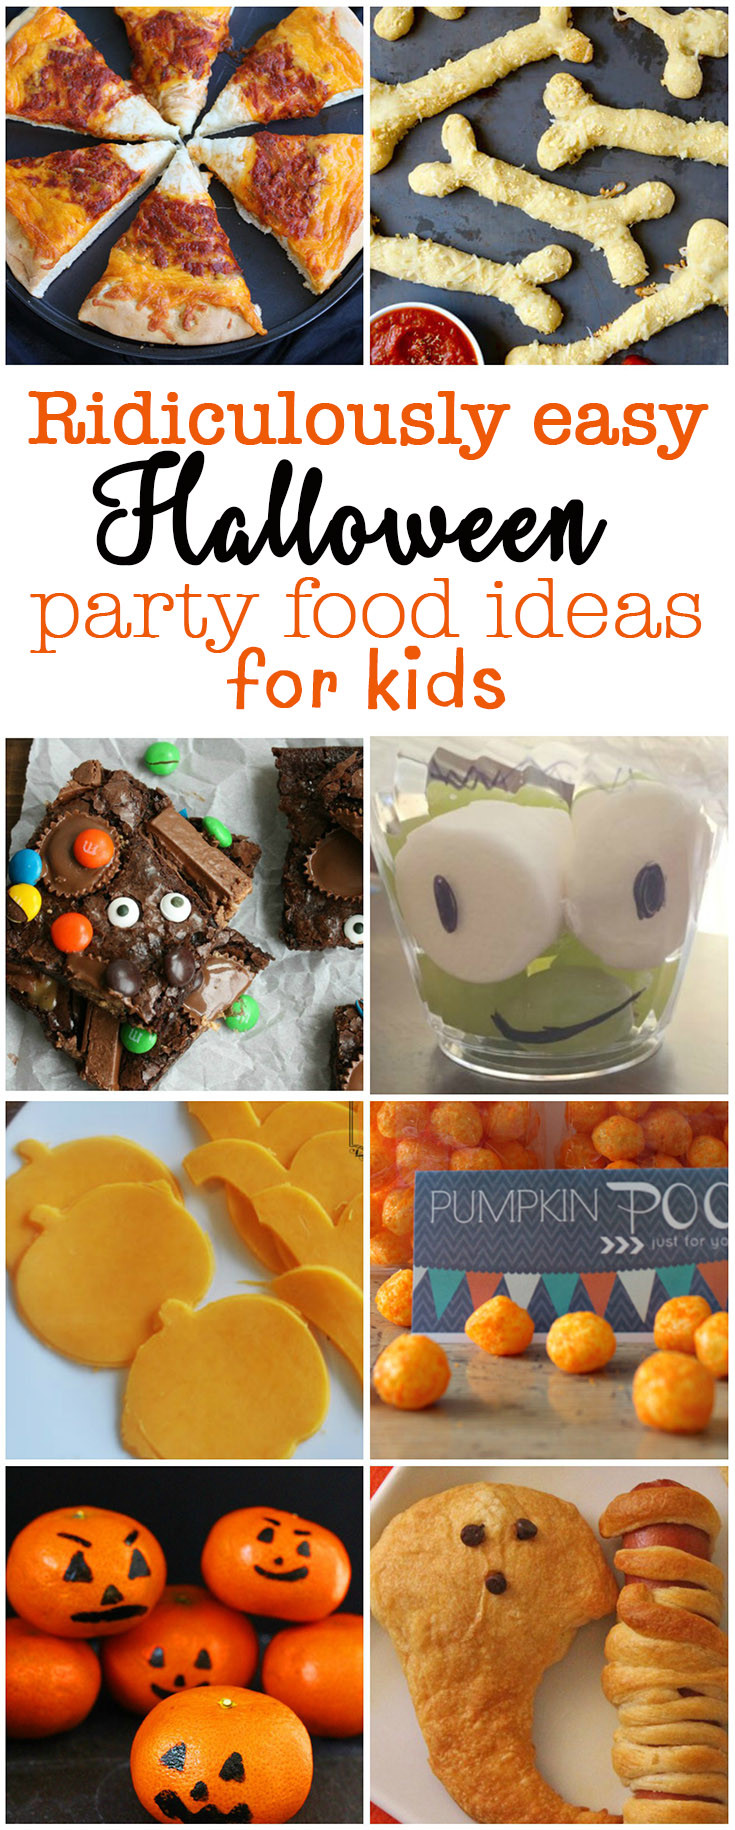 Halloween Food Ideas For Kids Party
 Ridiculously easy Halloween party food for kids Eat